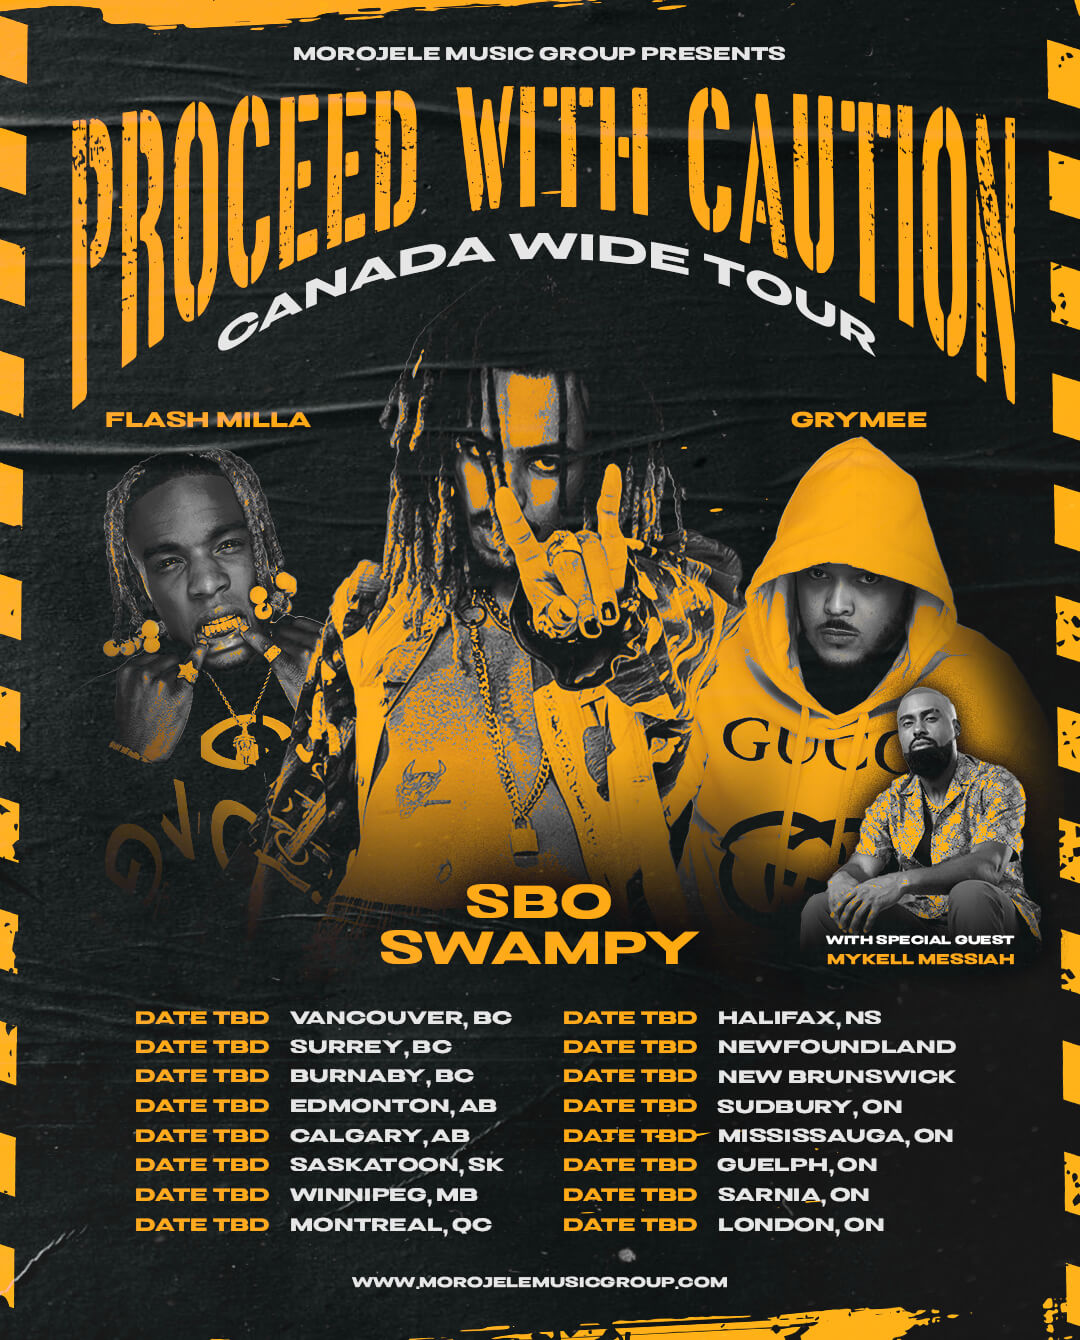 MMG_Proceed With Caution_Tour Poster (1)